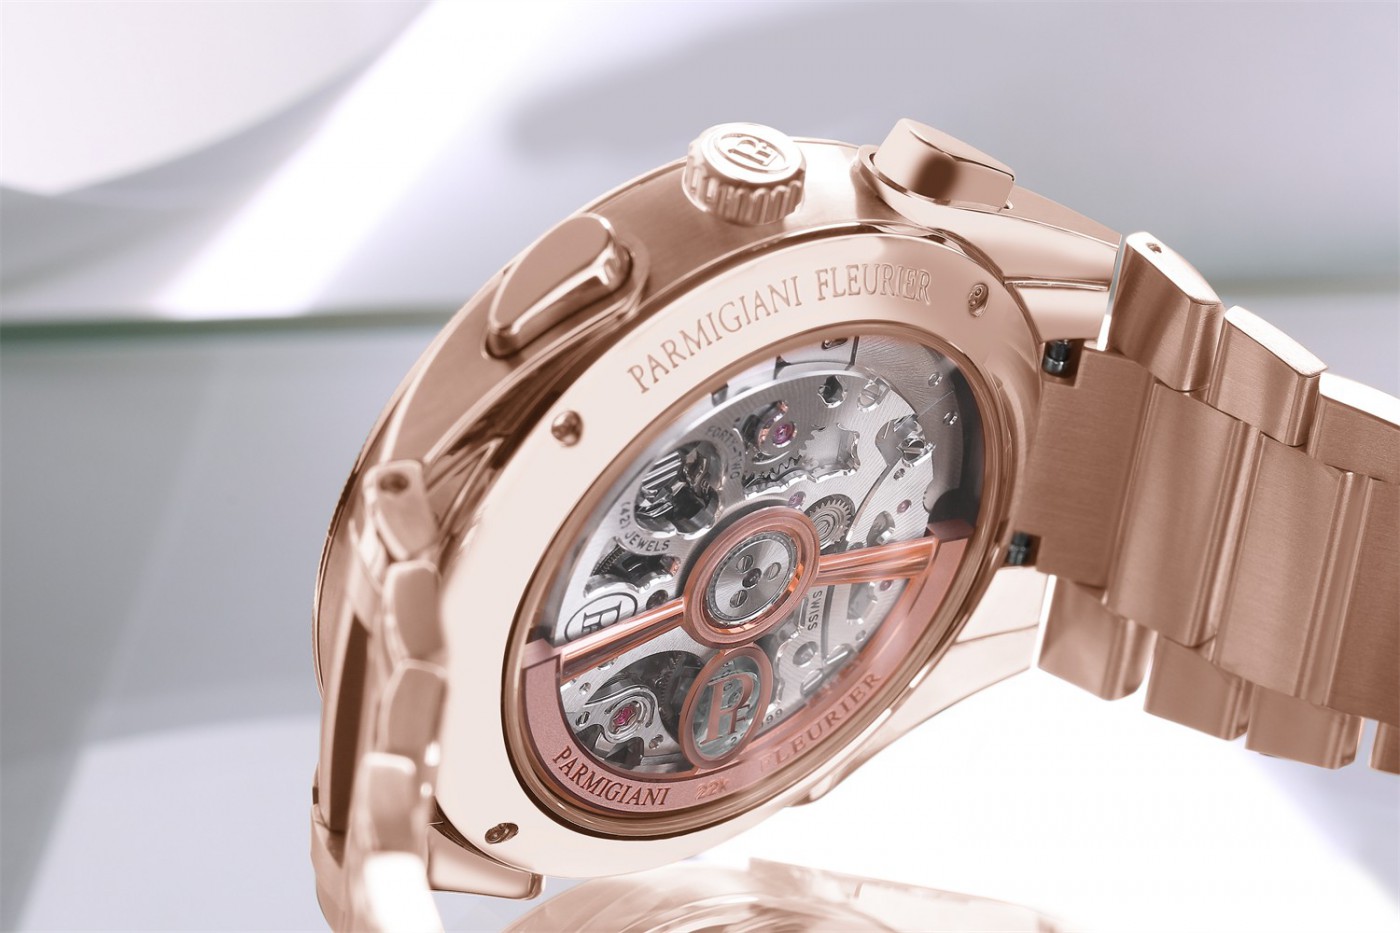 pictures-hi-res-chronograph_10.jpg